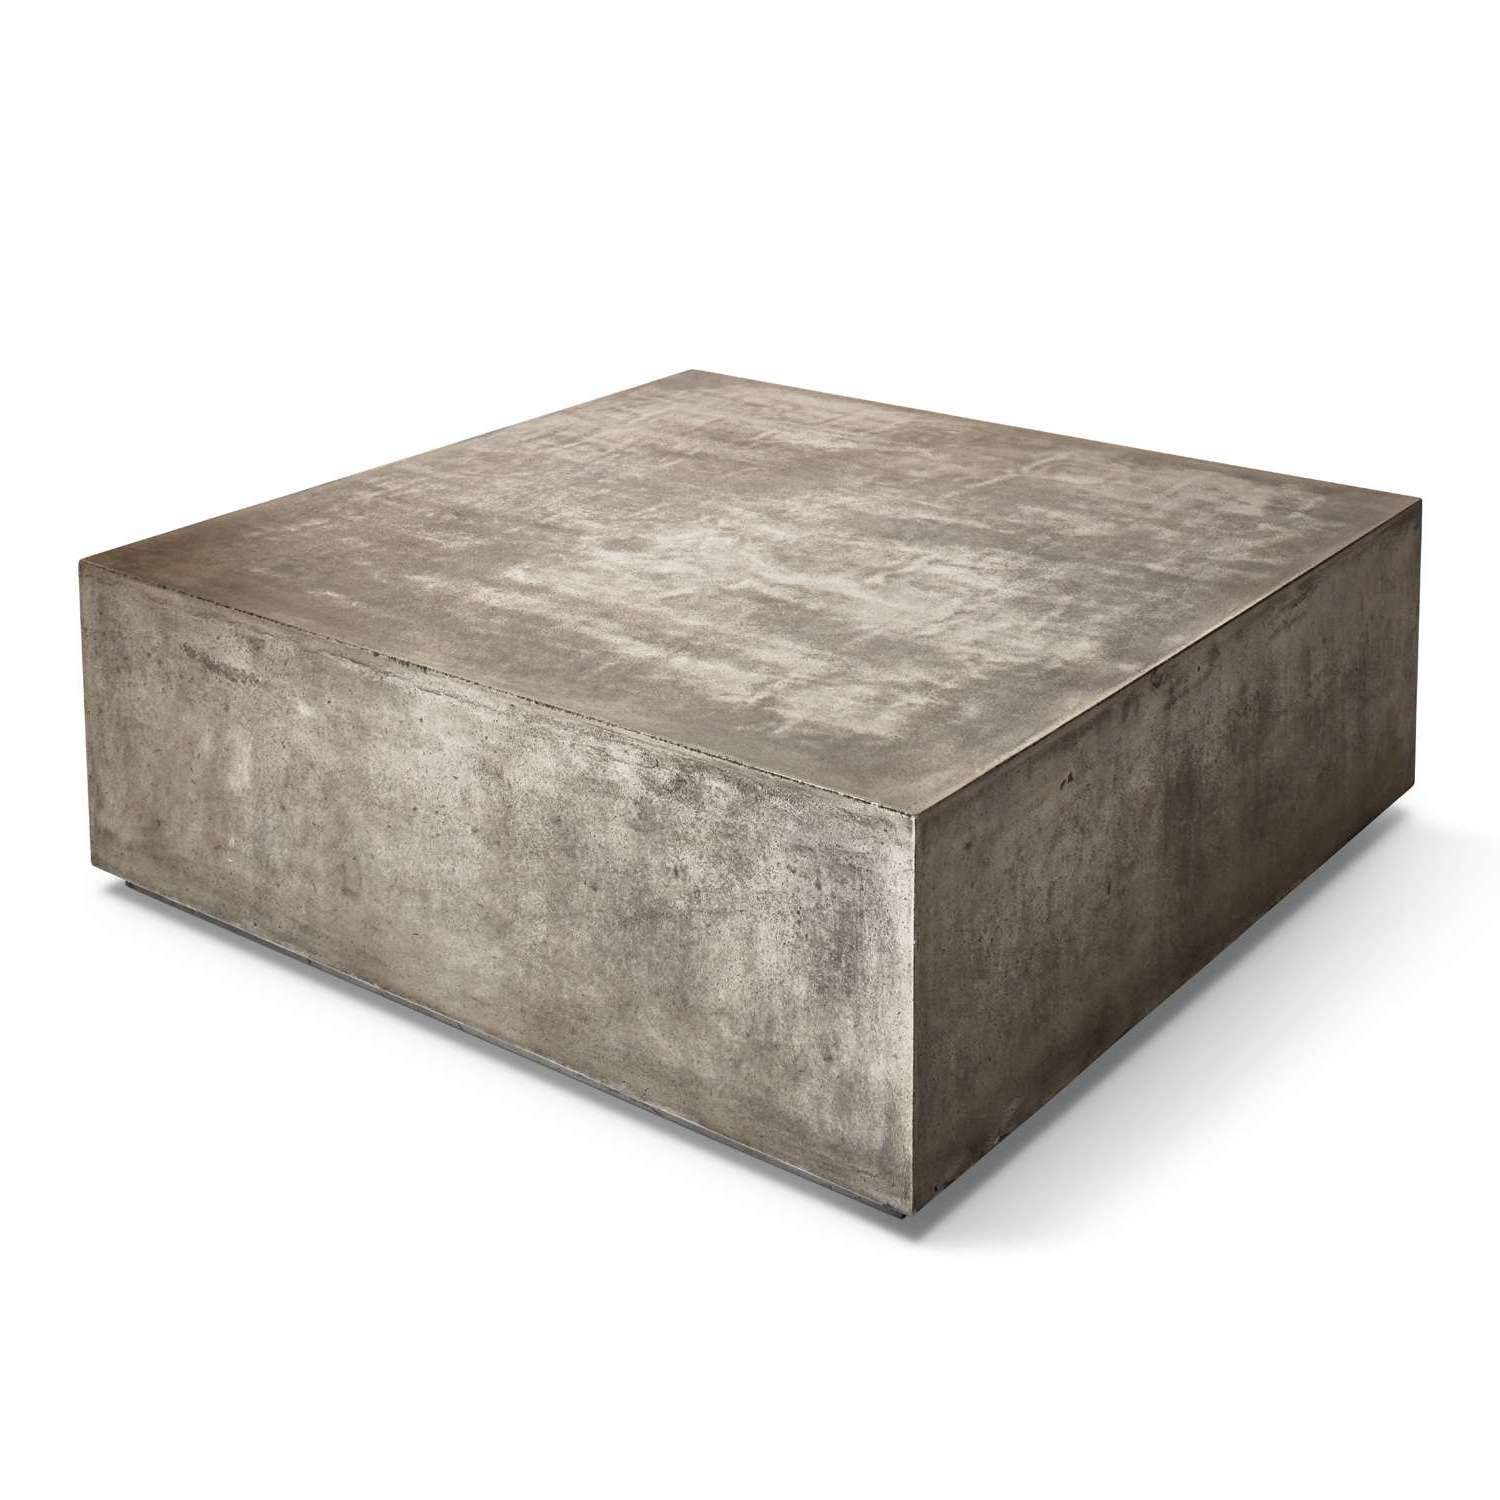 Newest Modern Coffee Tables With Storage Intended For Modern Coffee Tables & Low Tables (Gallery 4 of 20)